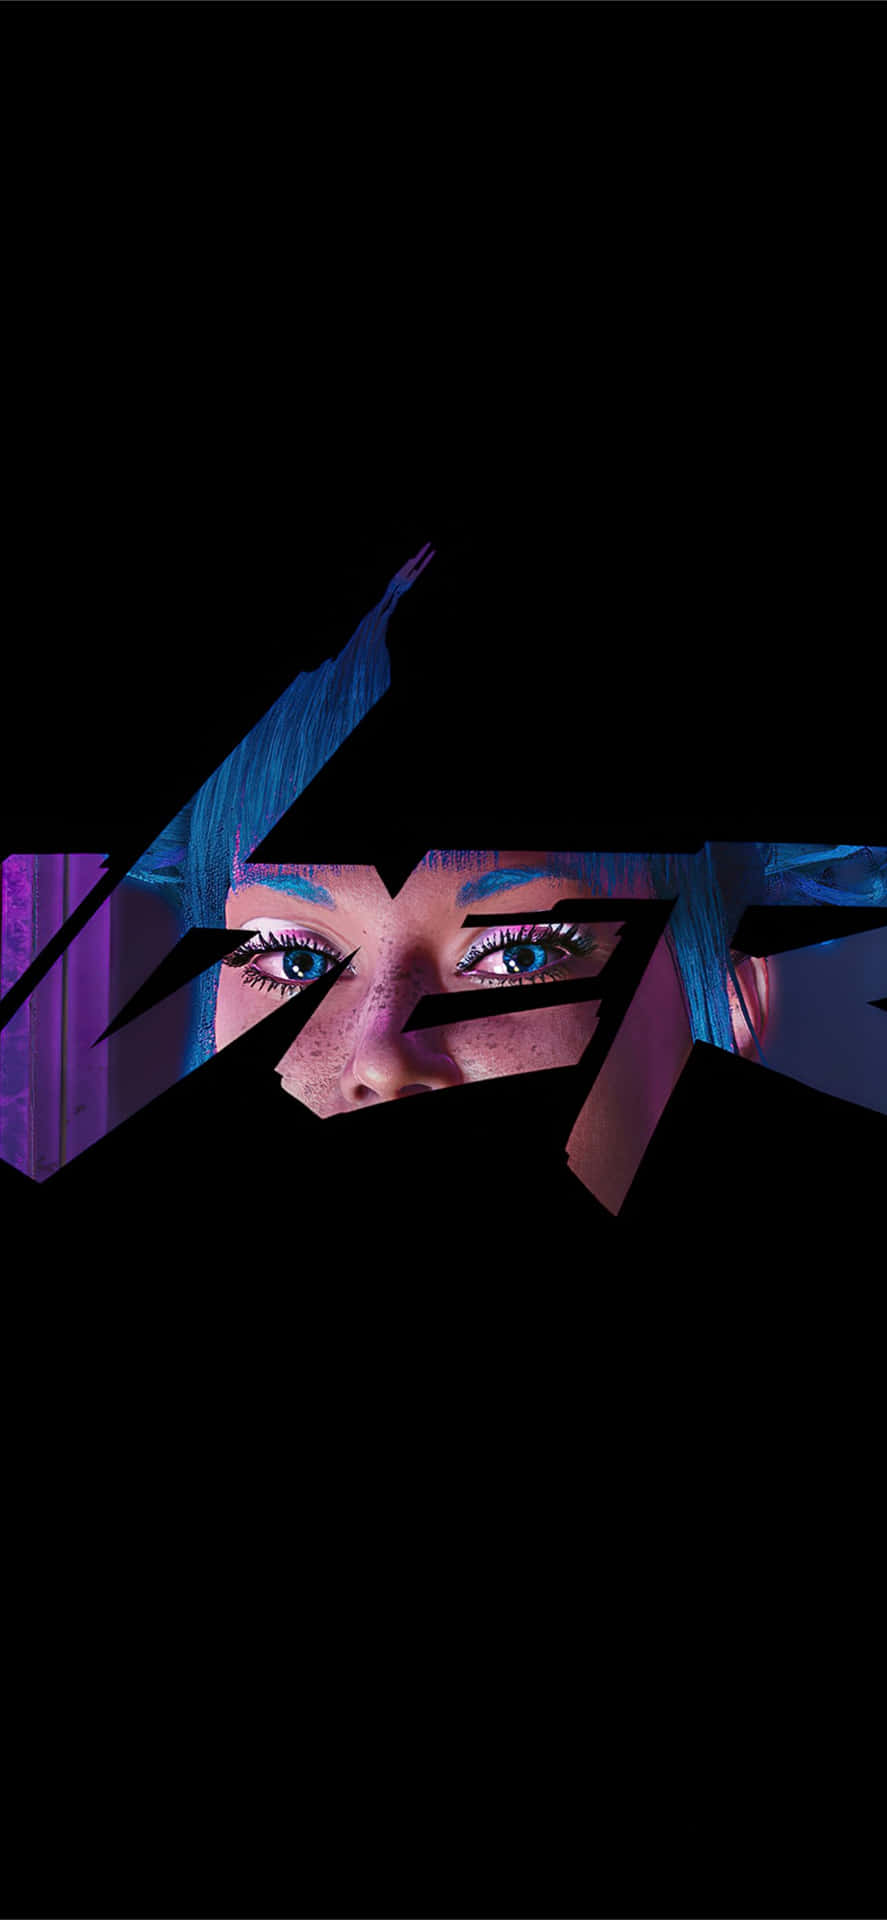 A Woman's Face With Blue Eyes And A Black Background Wallpaper